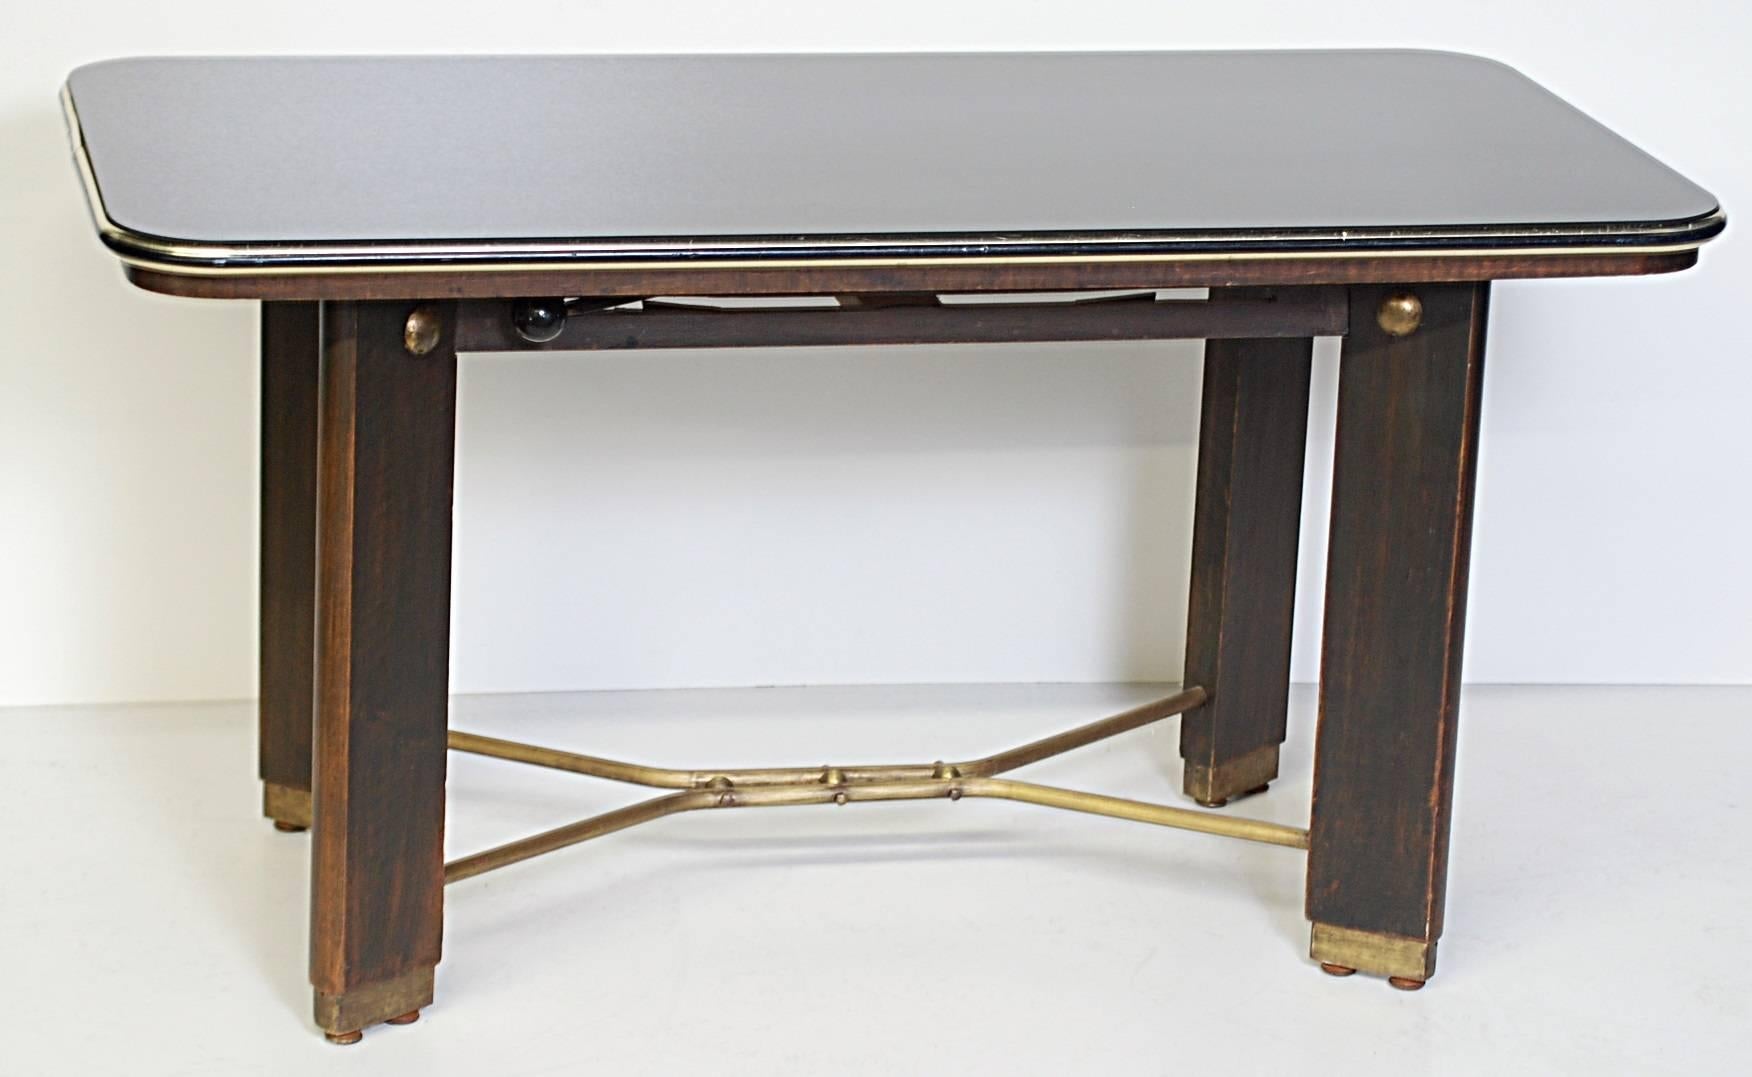 Unusual coffee table with a dark wood base, brass stretchers and brass end caps. Blackened glass top with brass trim. The mechanism is actuated by the lever raises the height of the top of the table. 28.5 inches extended - regular measurements below.